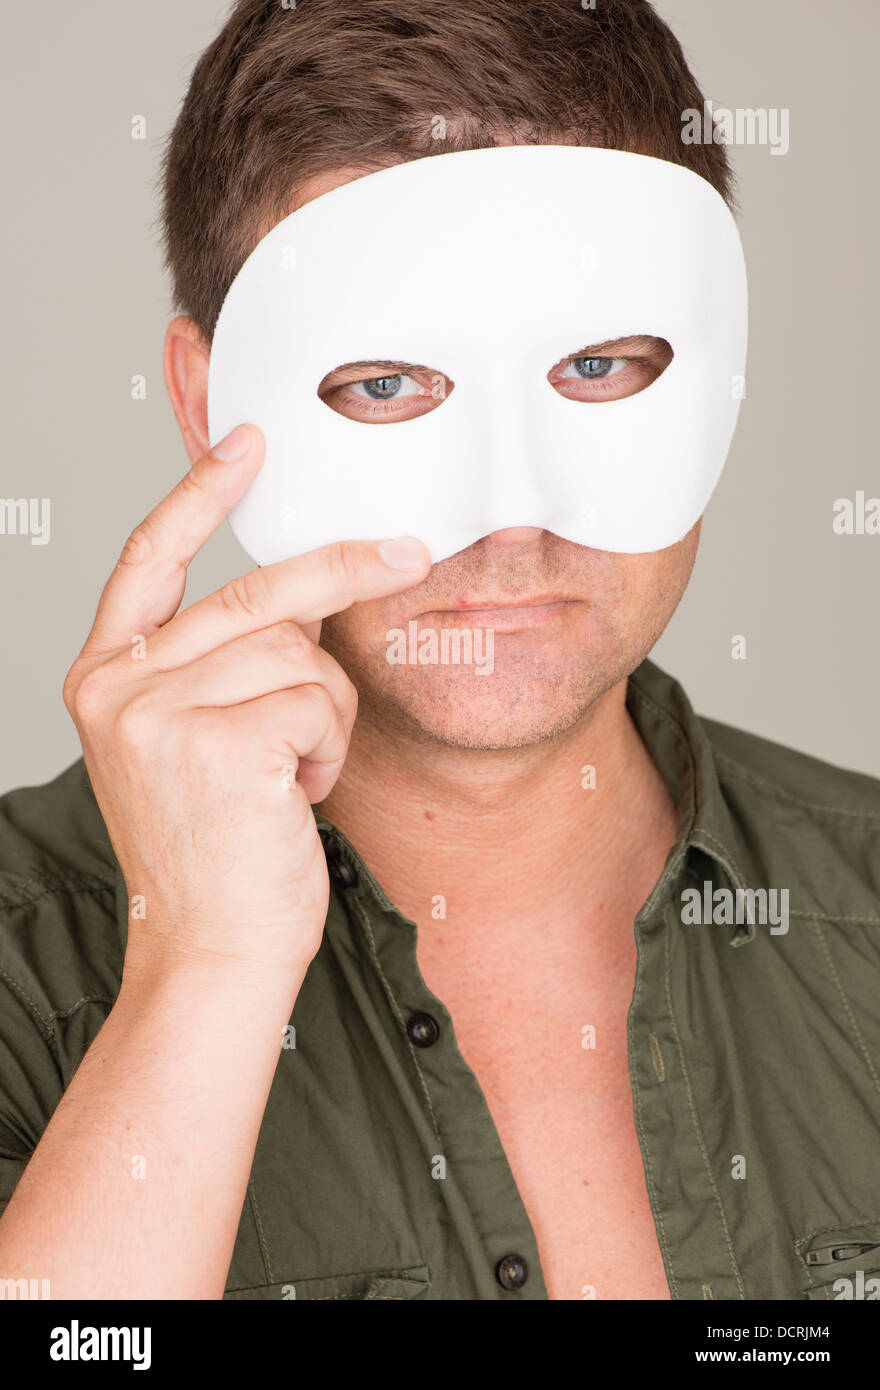 Pensive and serious man hiding behind white mask Stock Photo